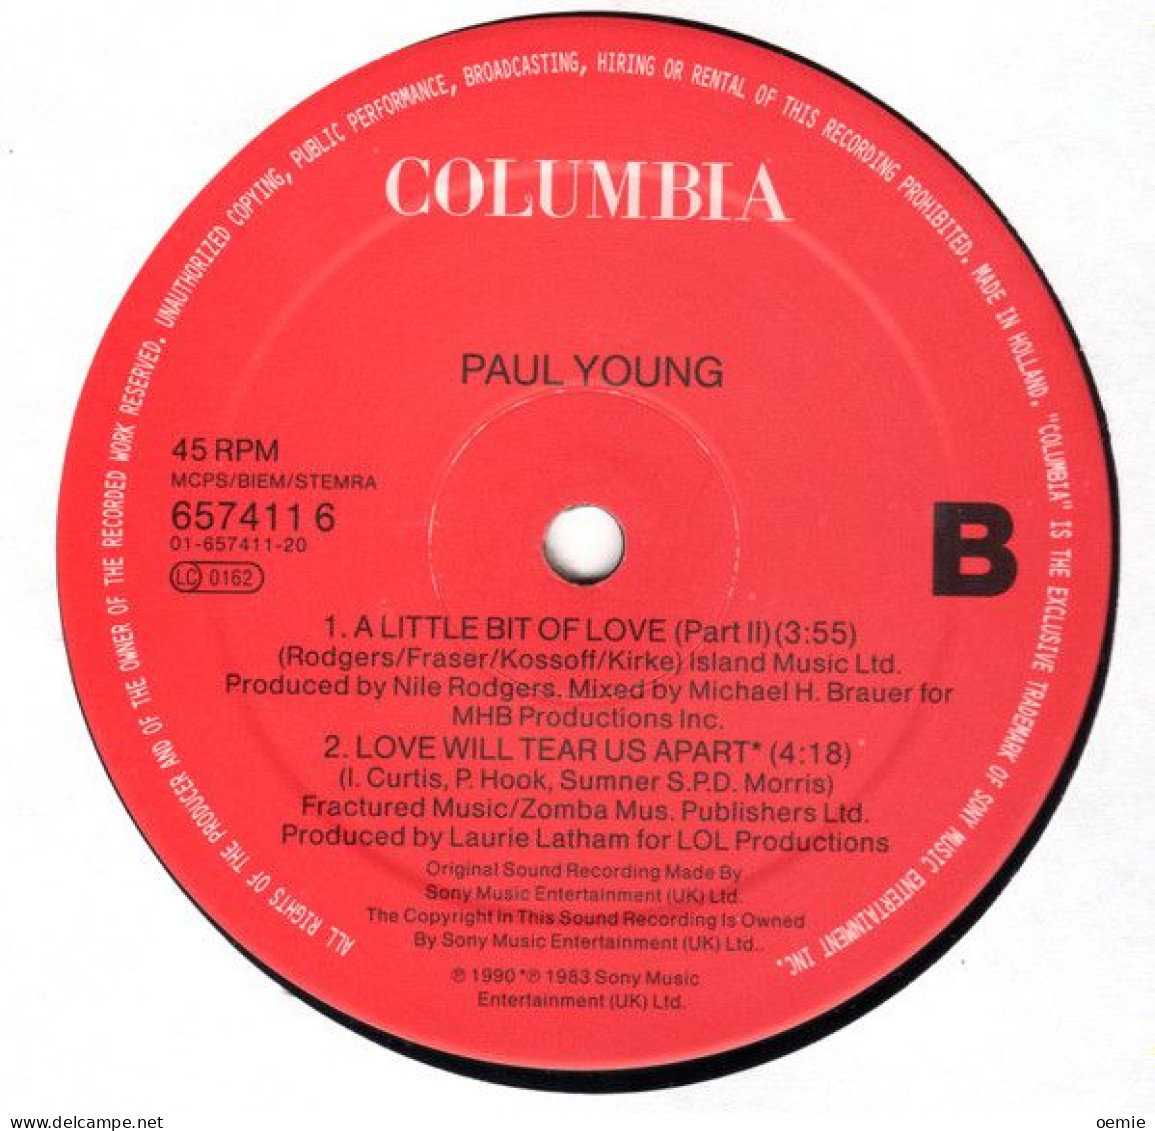 PAUL  YOUNG  DON'T DREAM IT'S OVER - 45 G - Maxi-Single